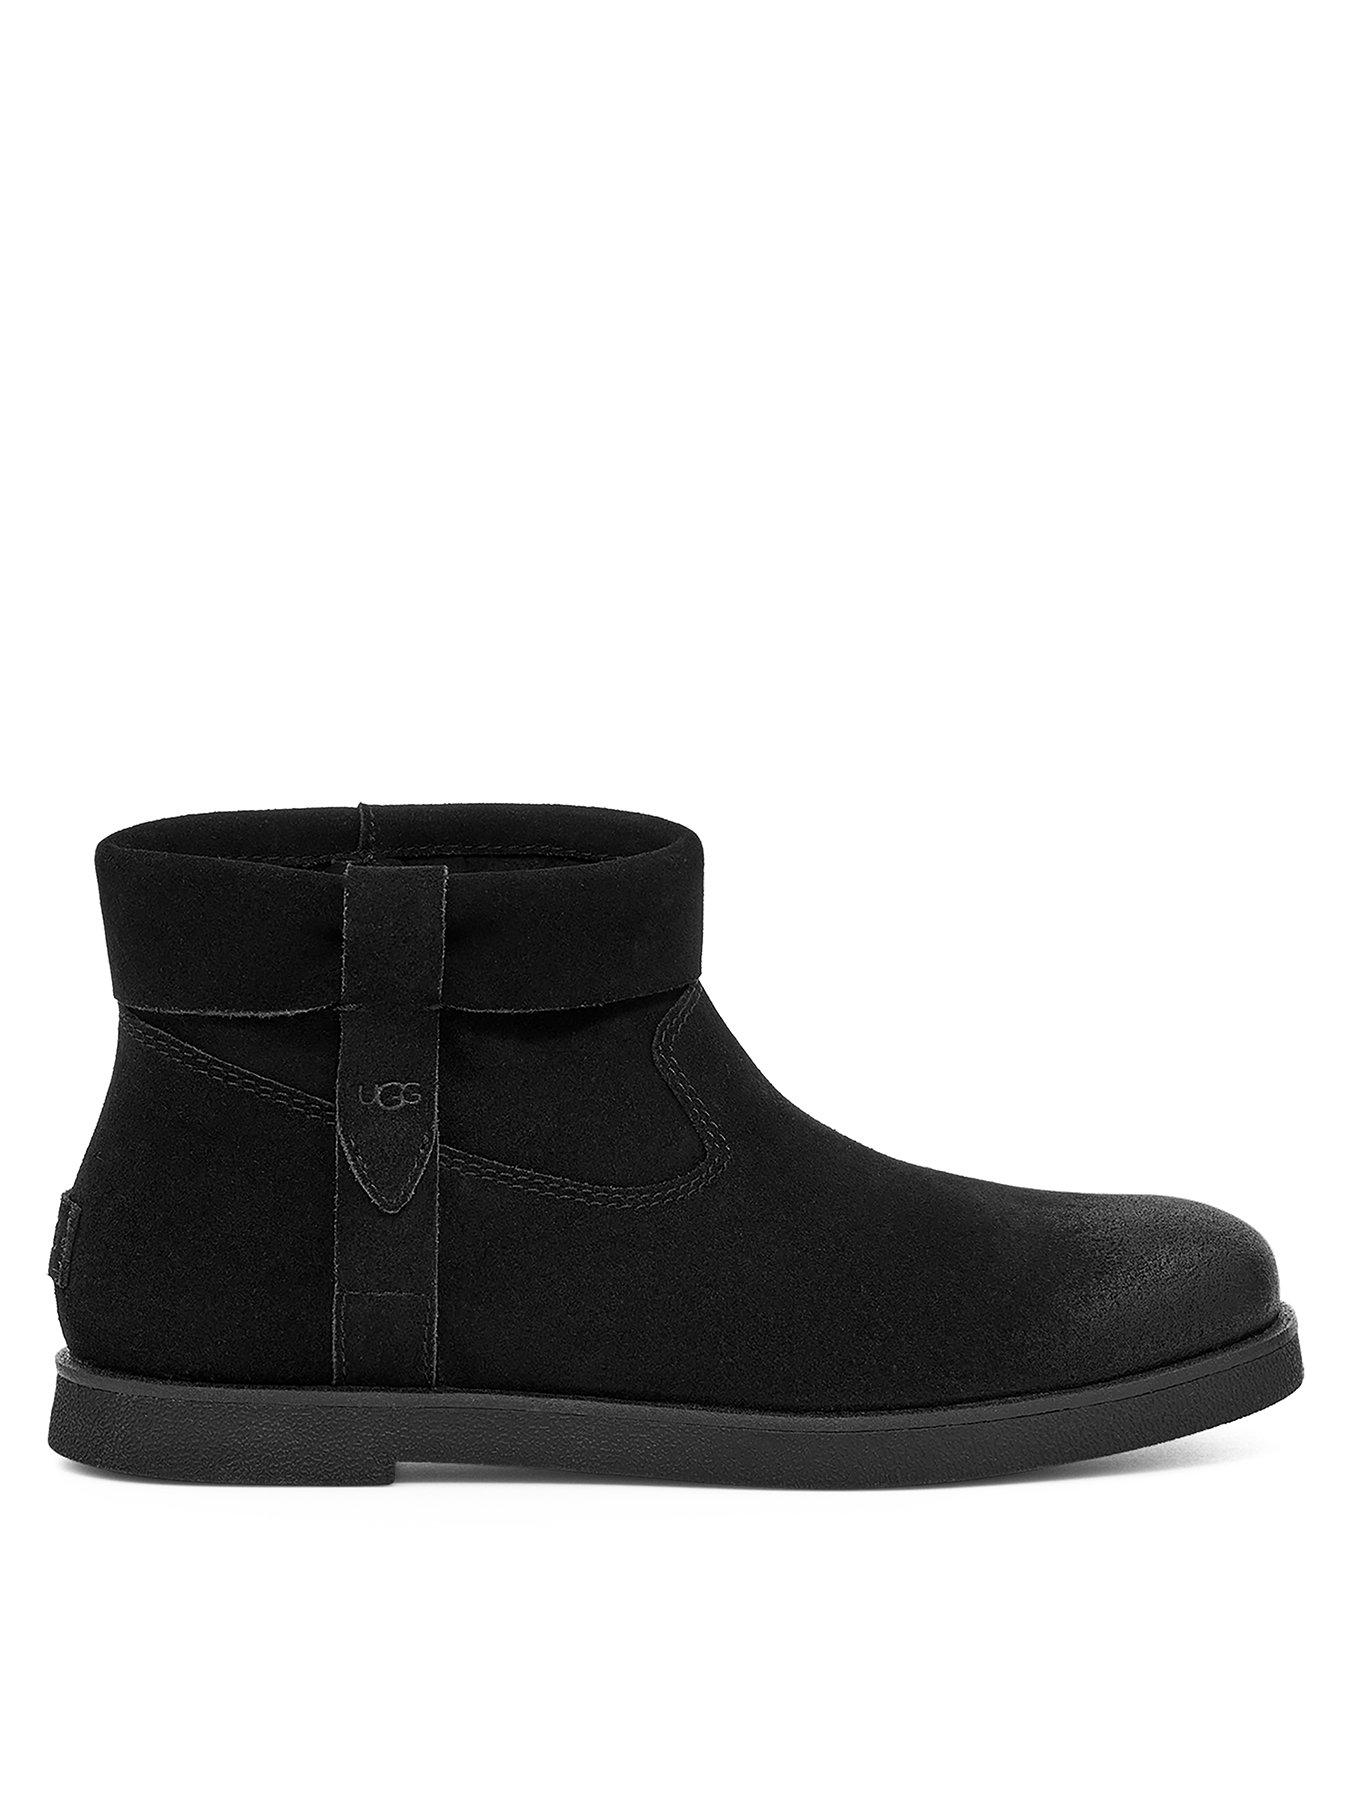 UGG Boots Clearance Sale | Very